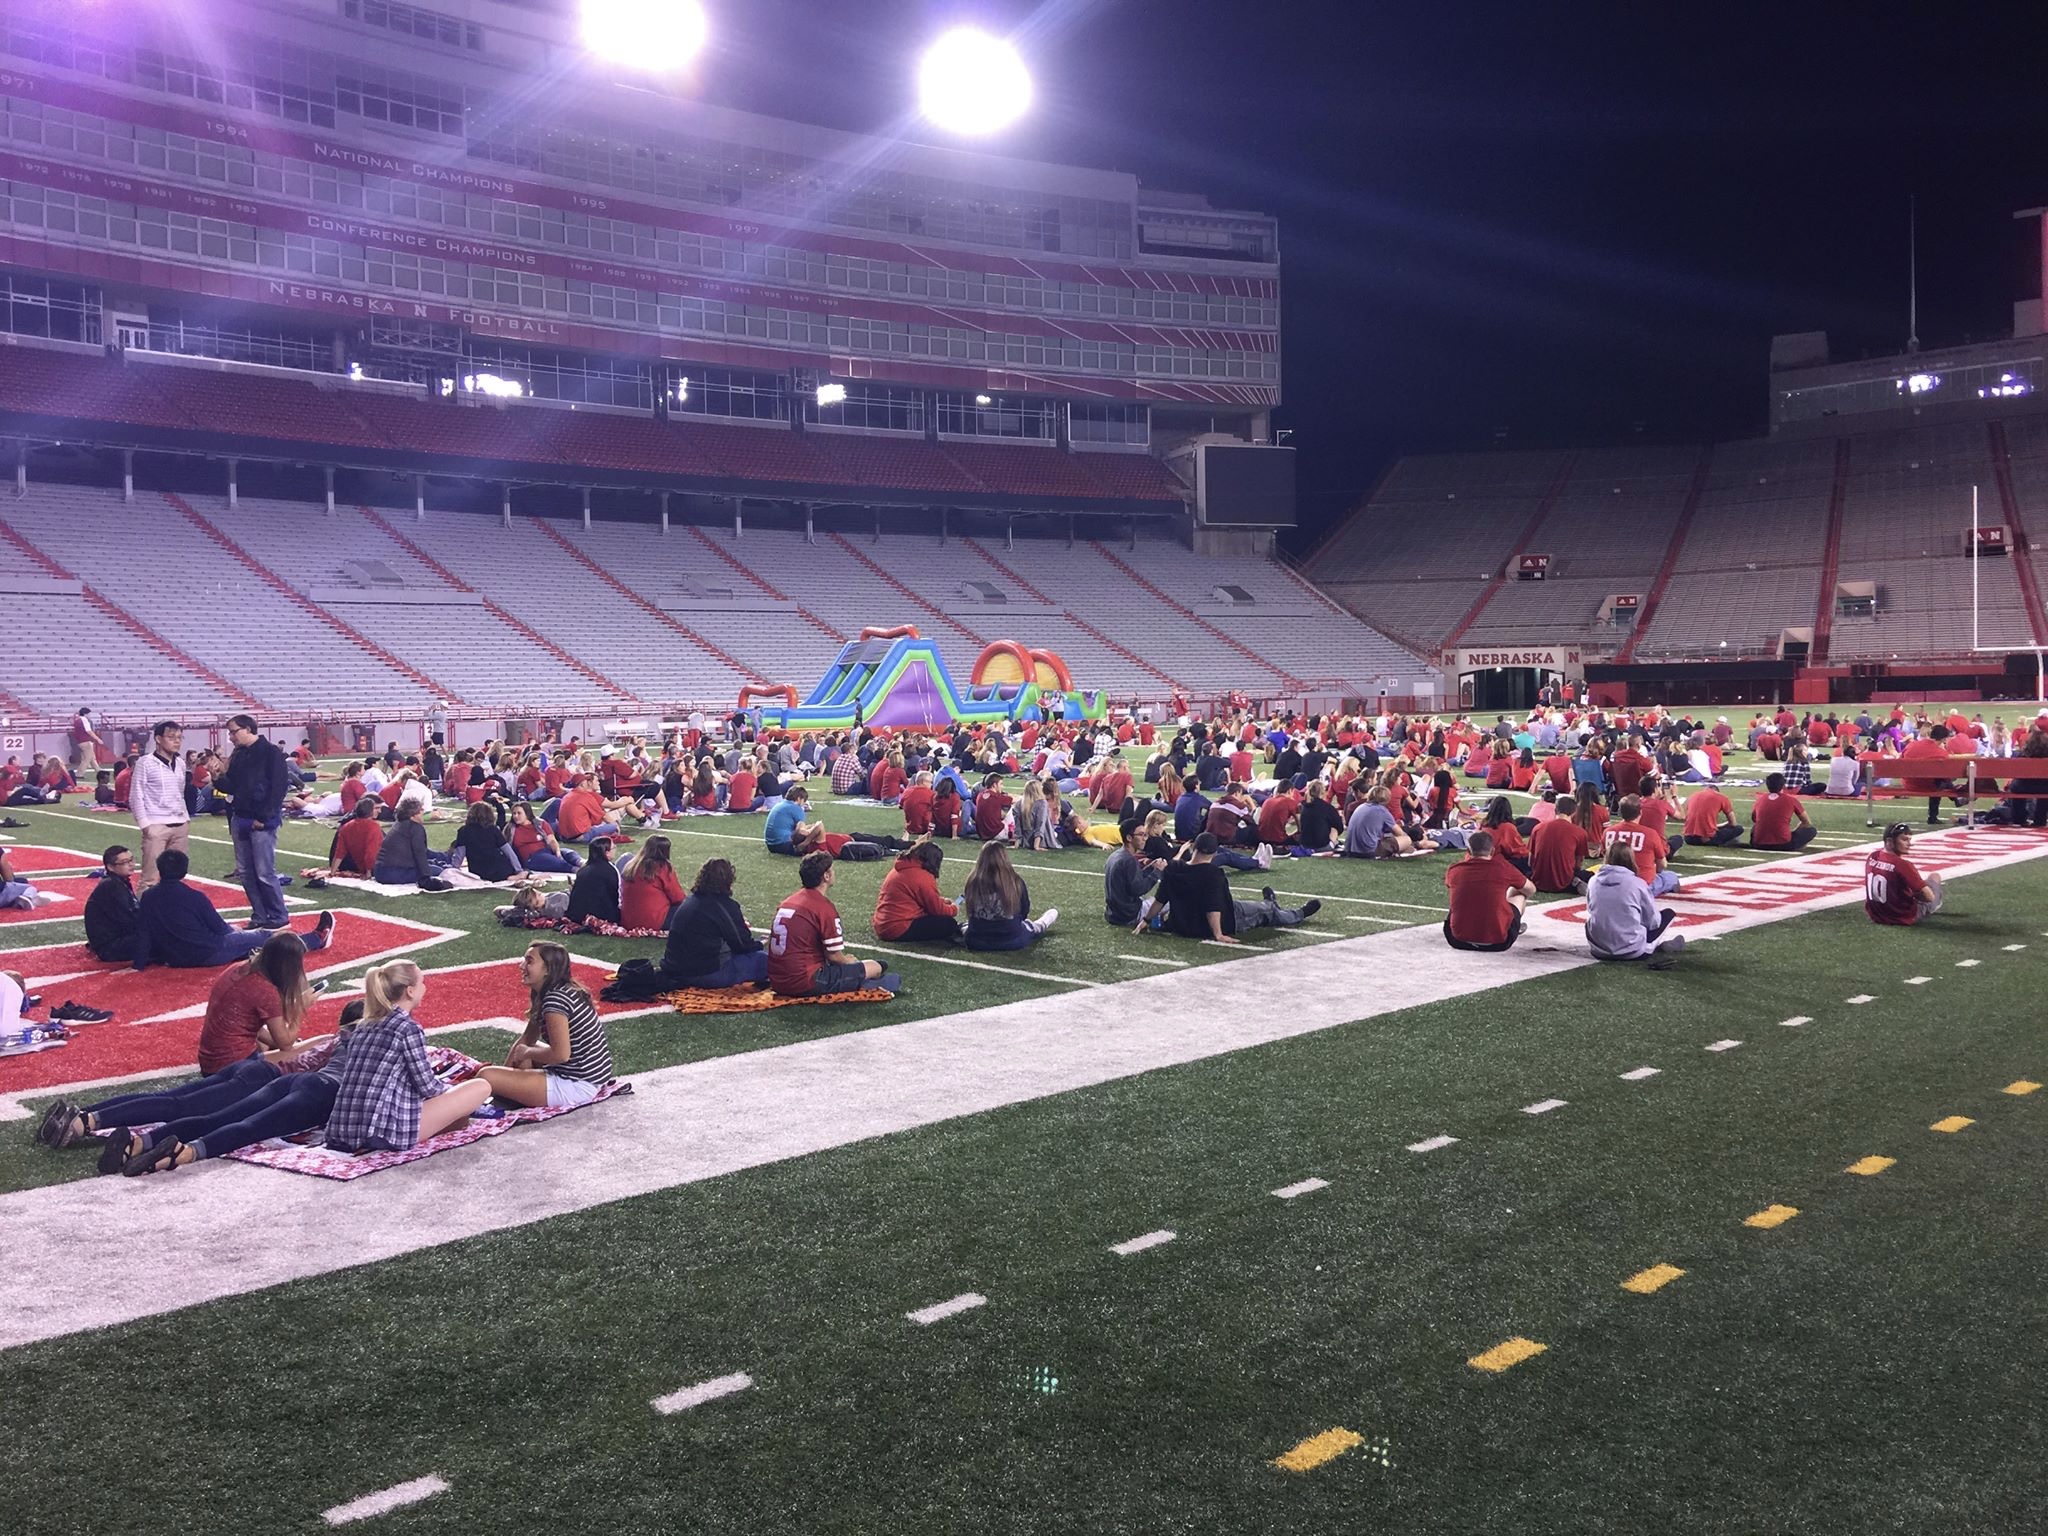 Bring a blanket and some friends to watch Husker football take on Illinois.